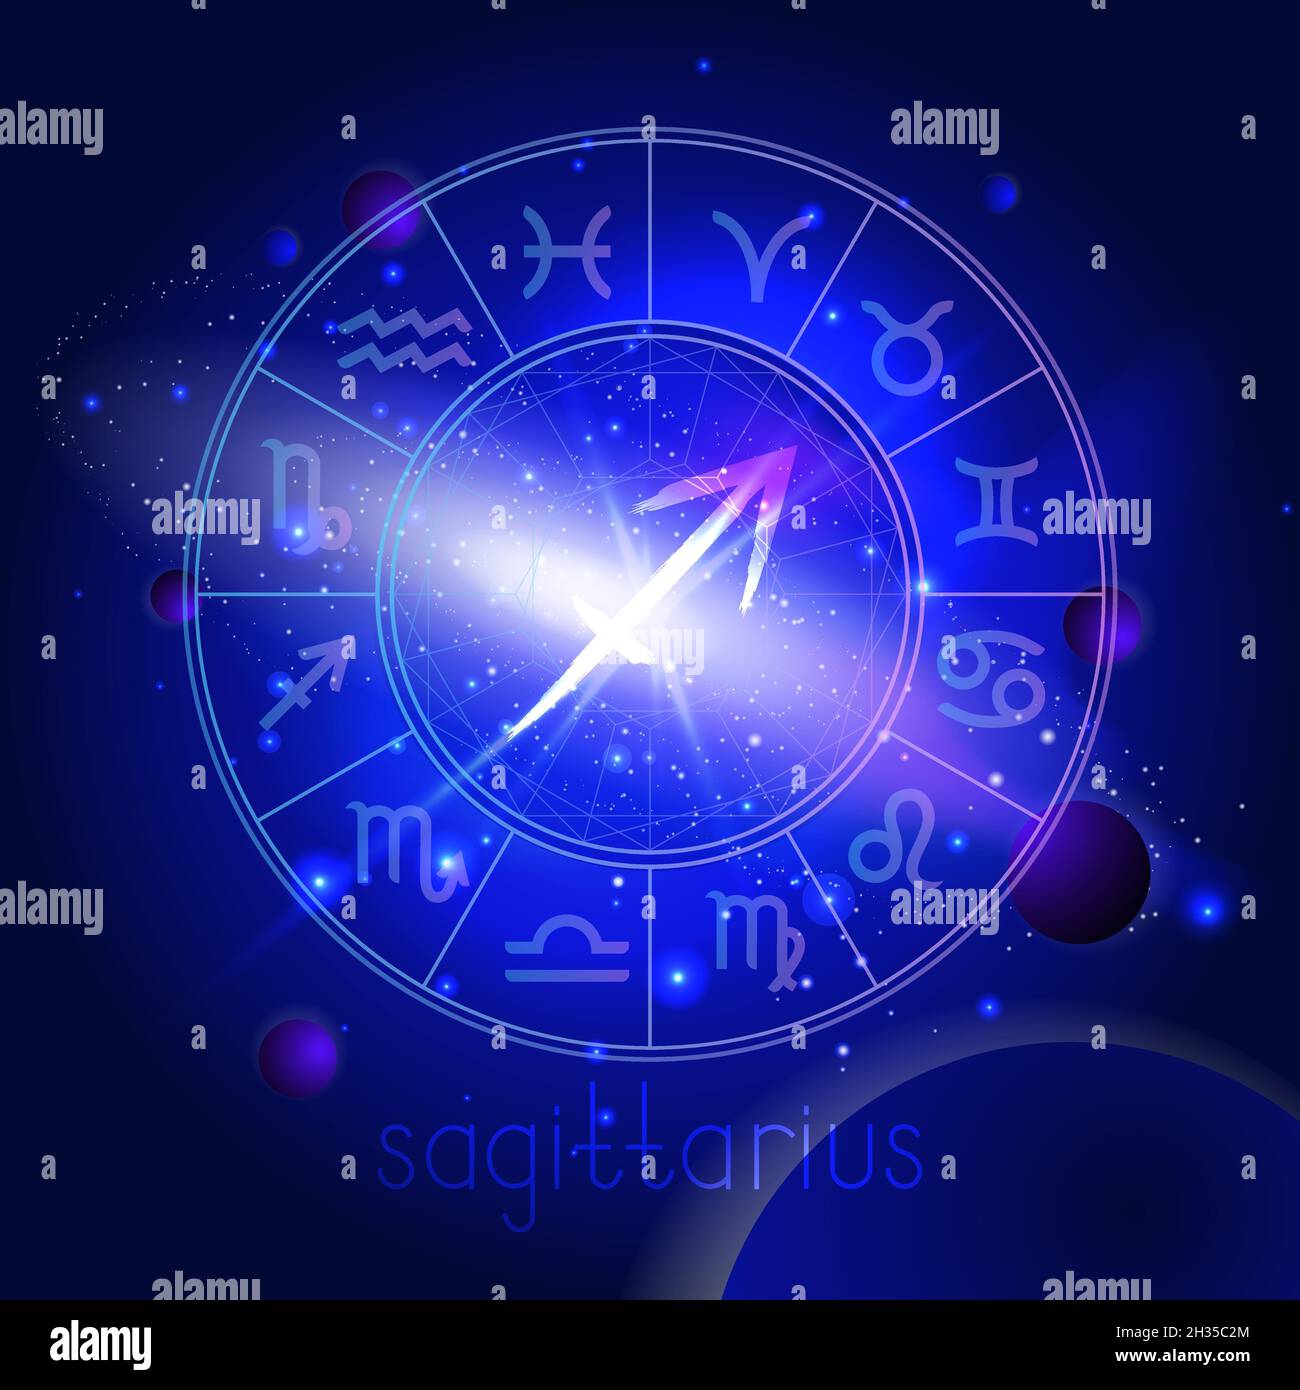 Vector illustration of sign SAGITTARIUS with Horoscope circle against the space background with planets and stars. Sacred symbols in blue colors. Stock Vector